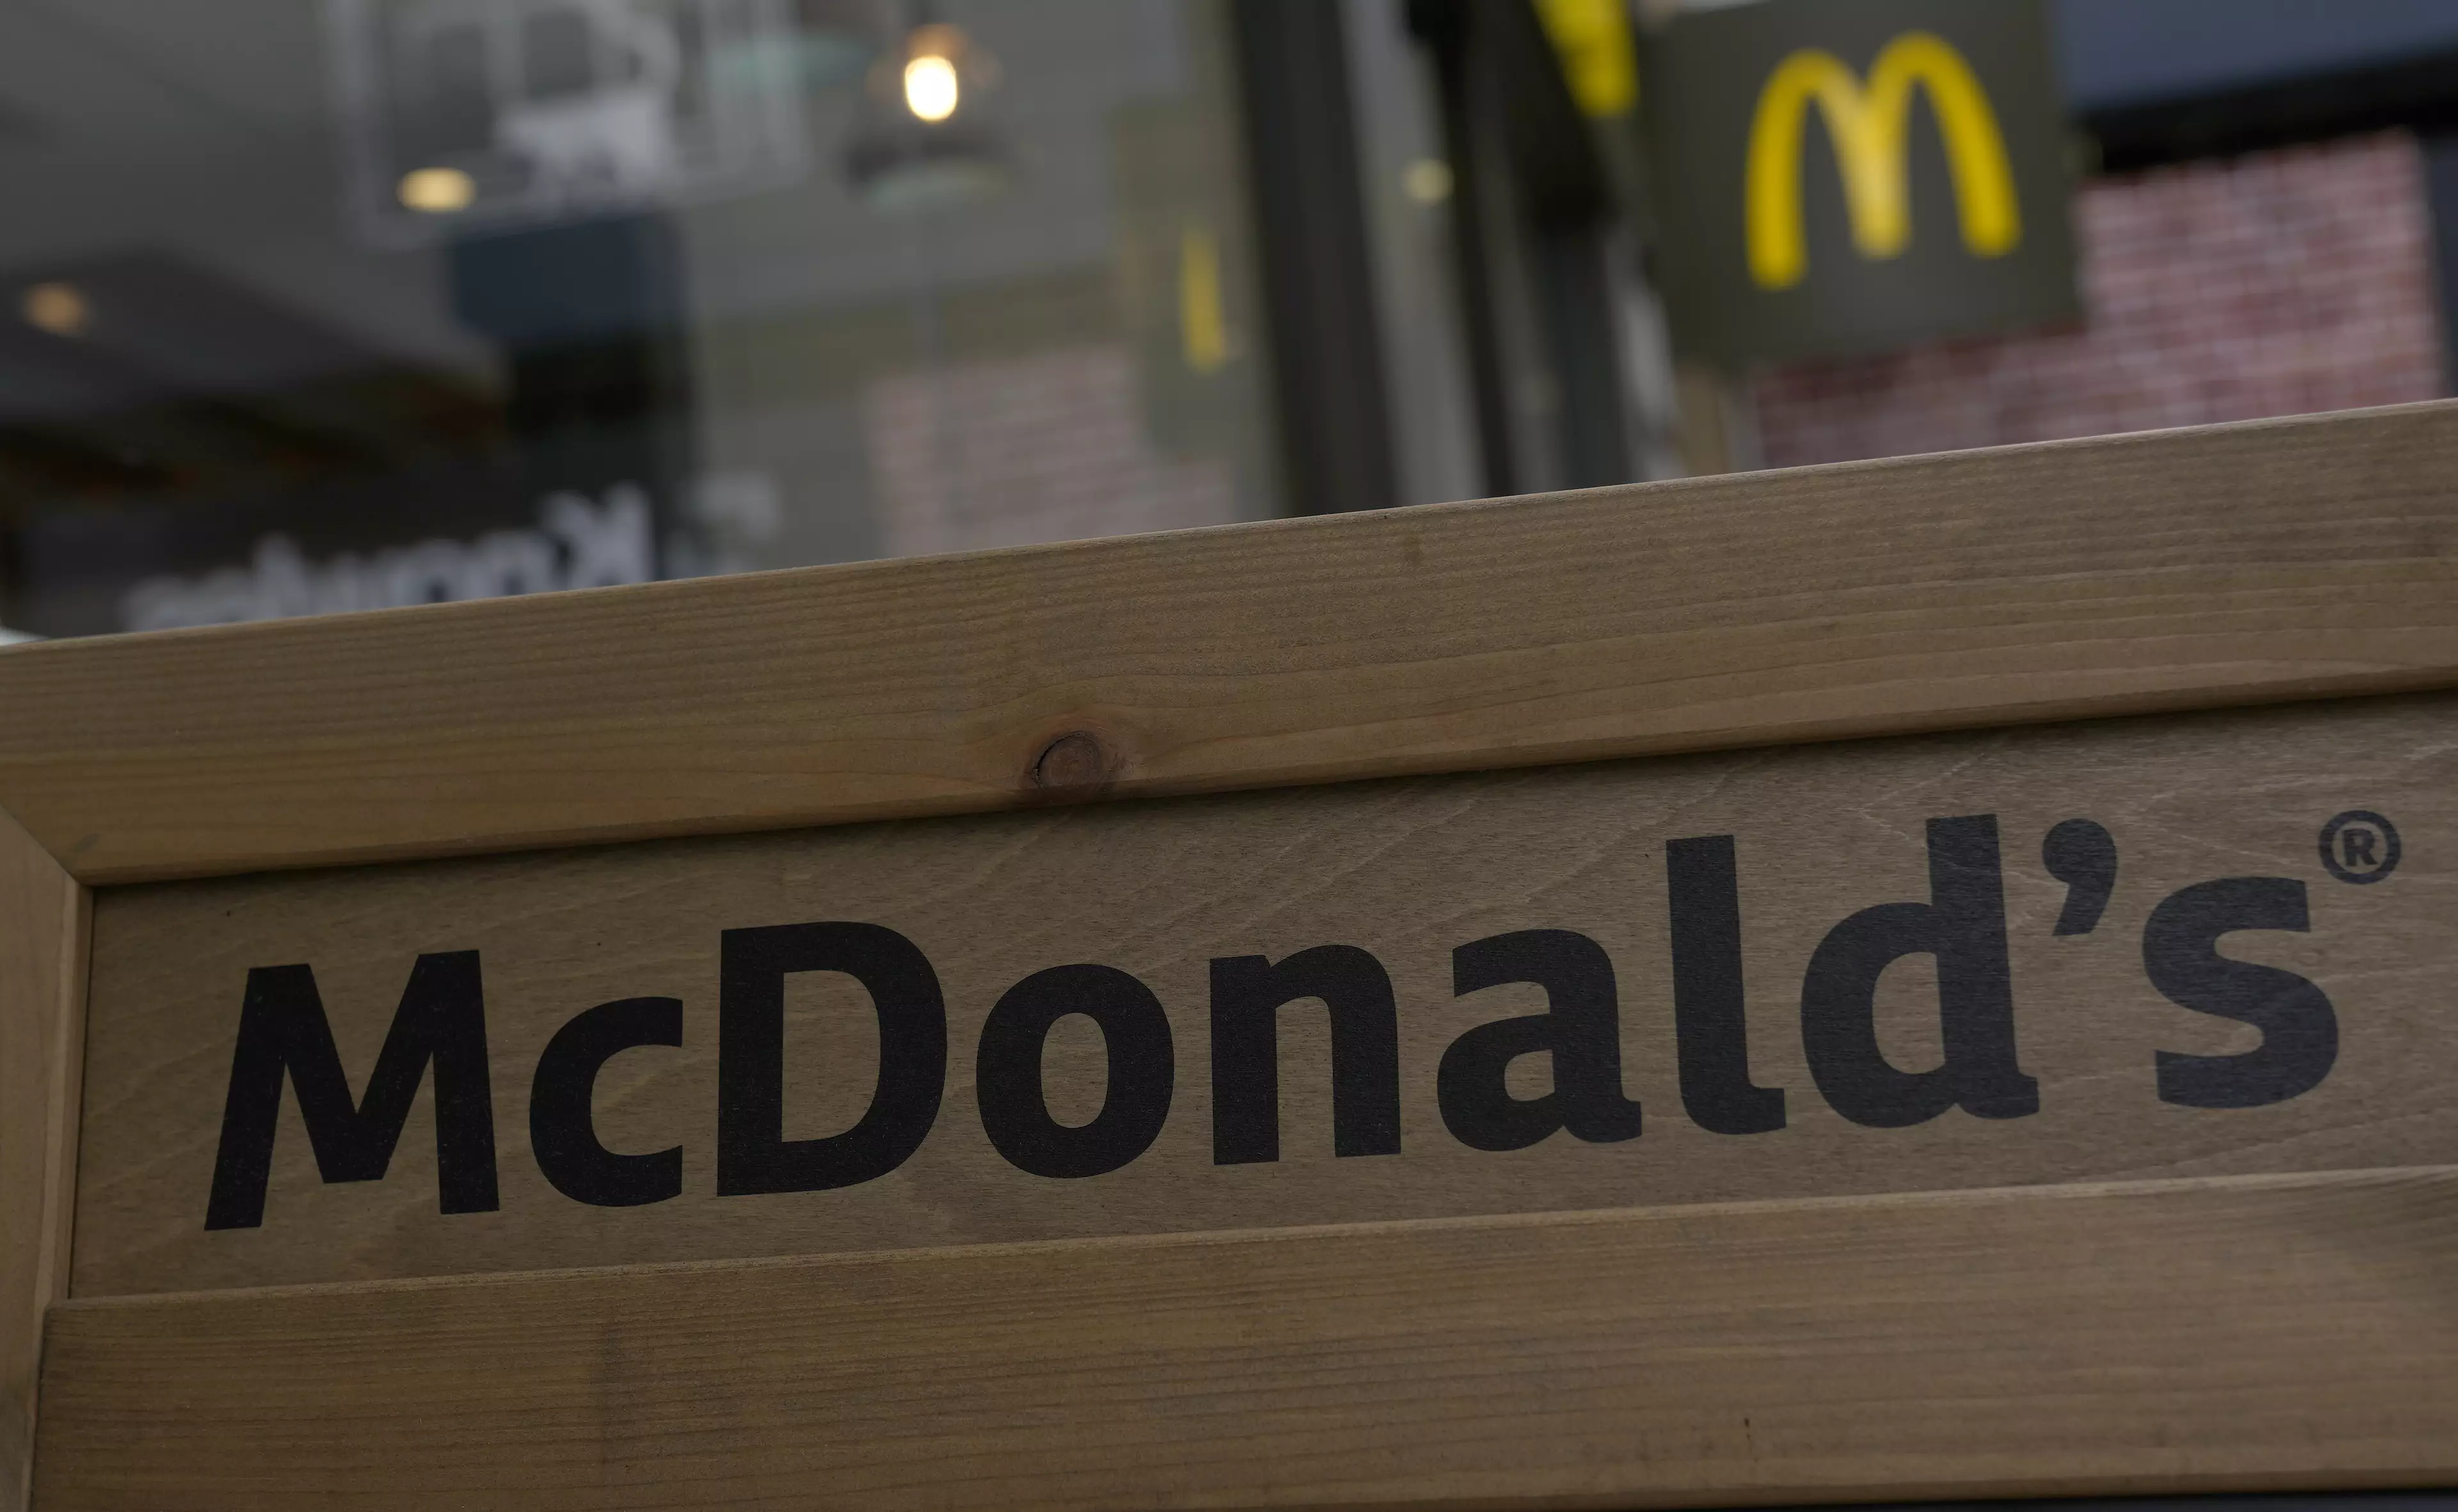 McDonald's responded to claims the FTC is investigating the McFlurry machines.